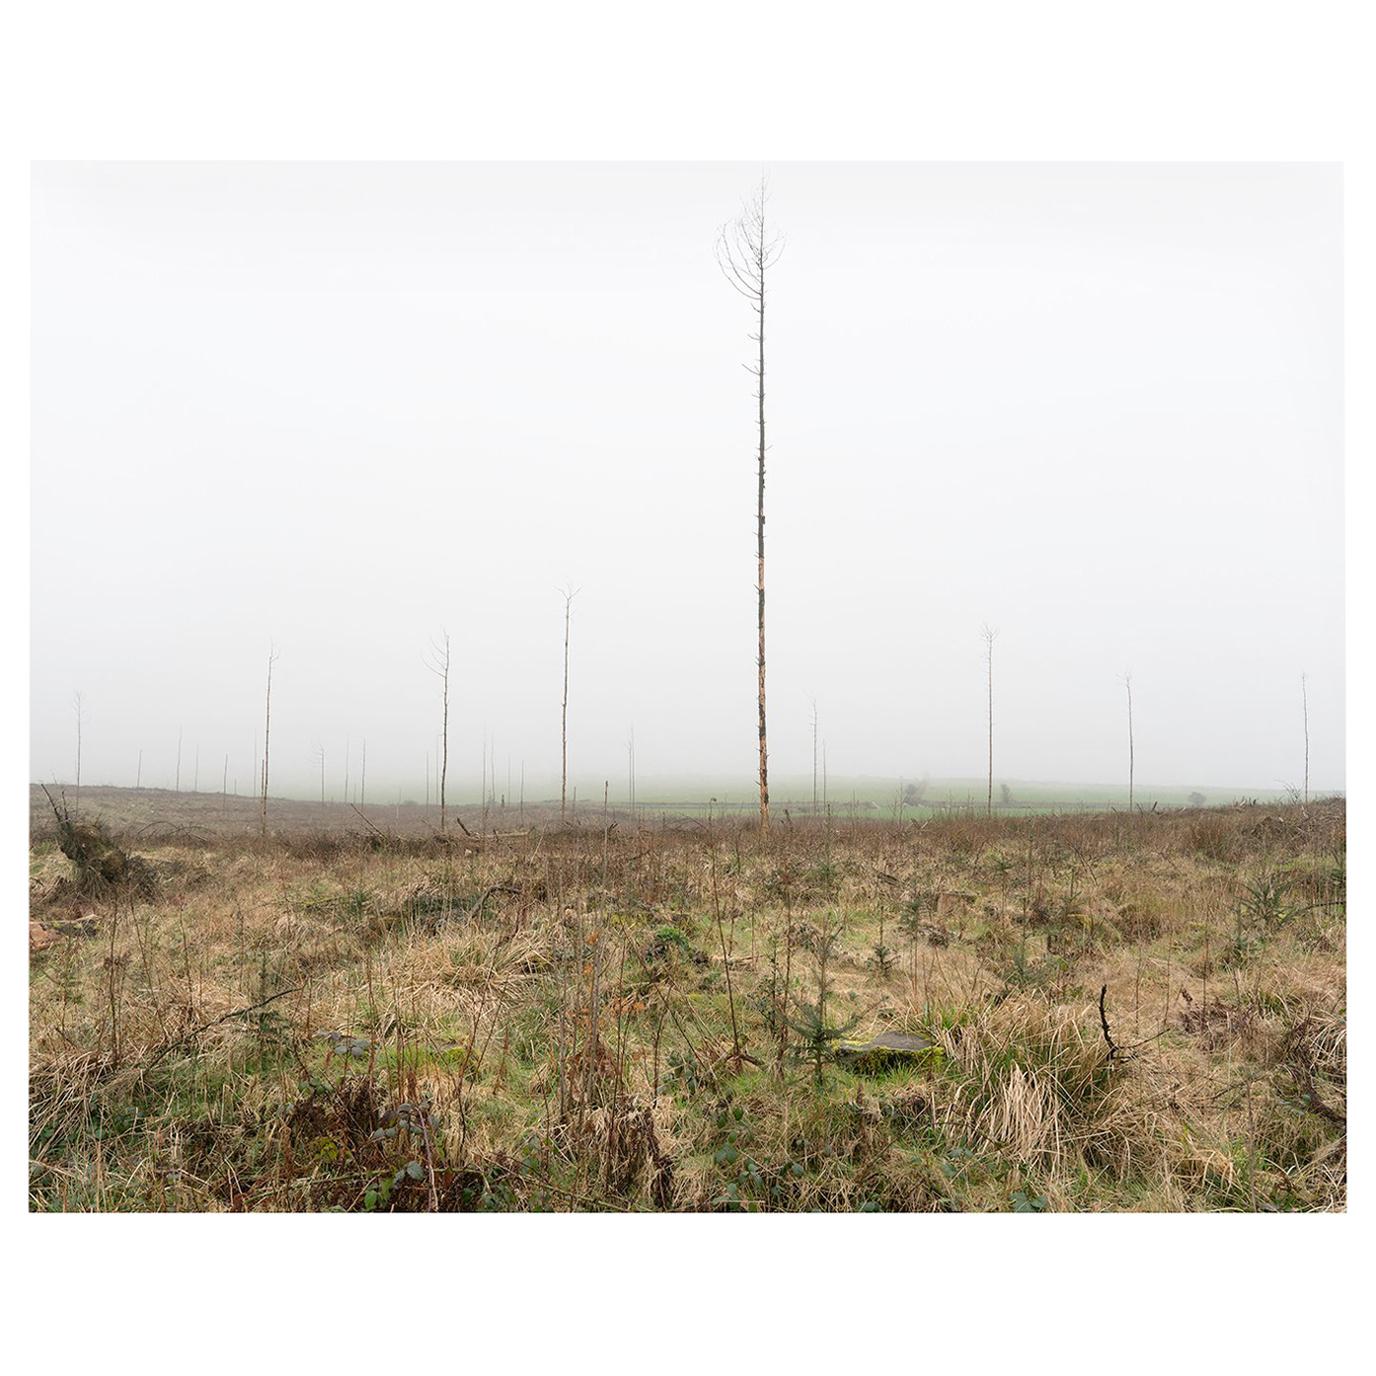 Christopher Sharples 'Forestry', 2017